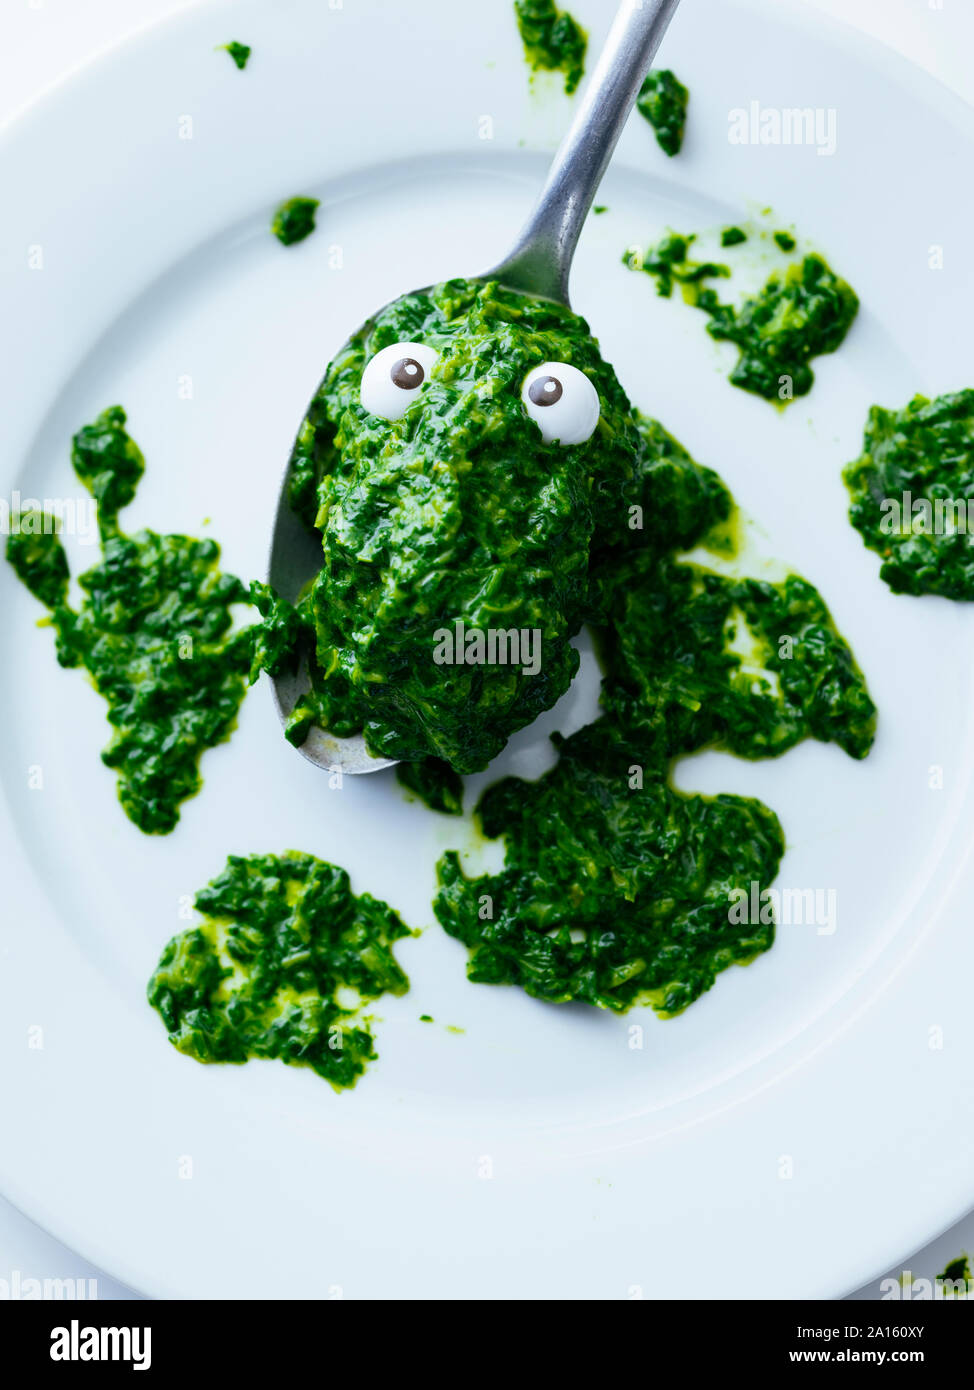 Spinach blob with artificial eyes on spoon Stock Photo